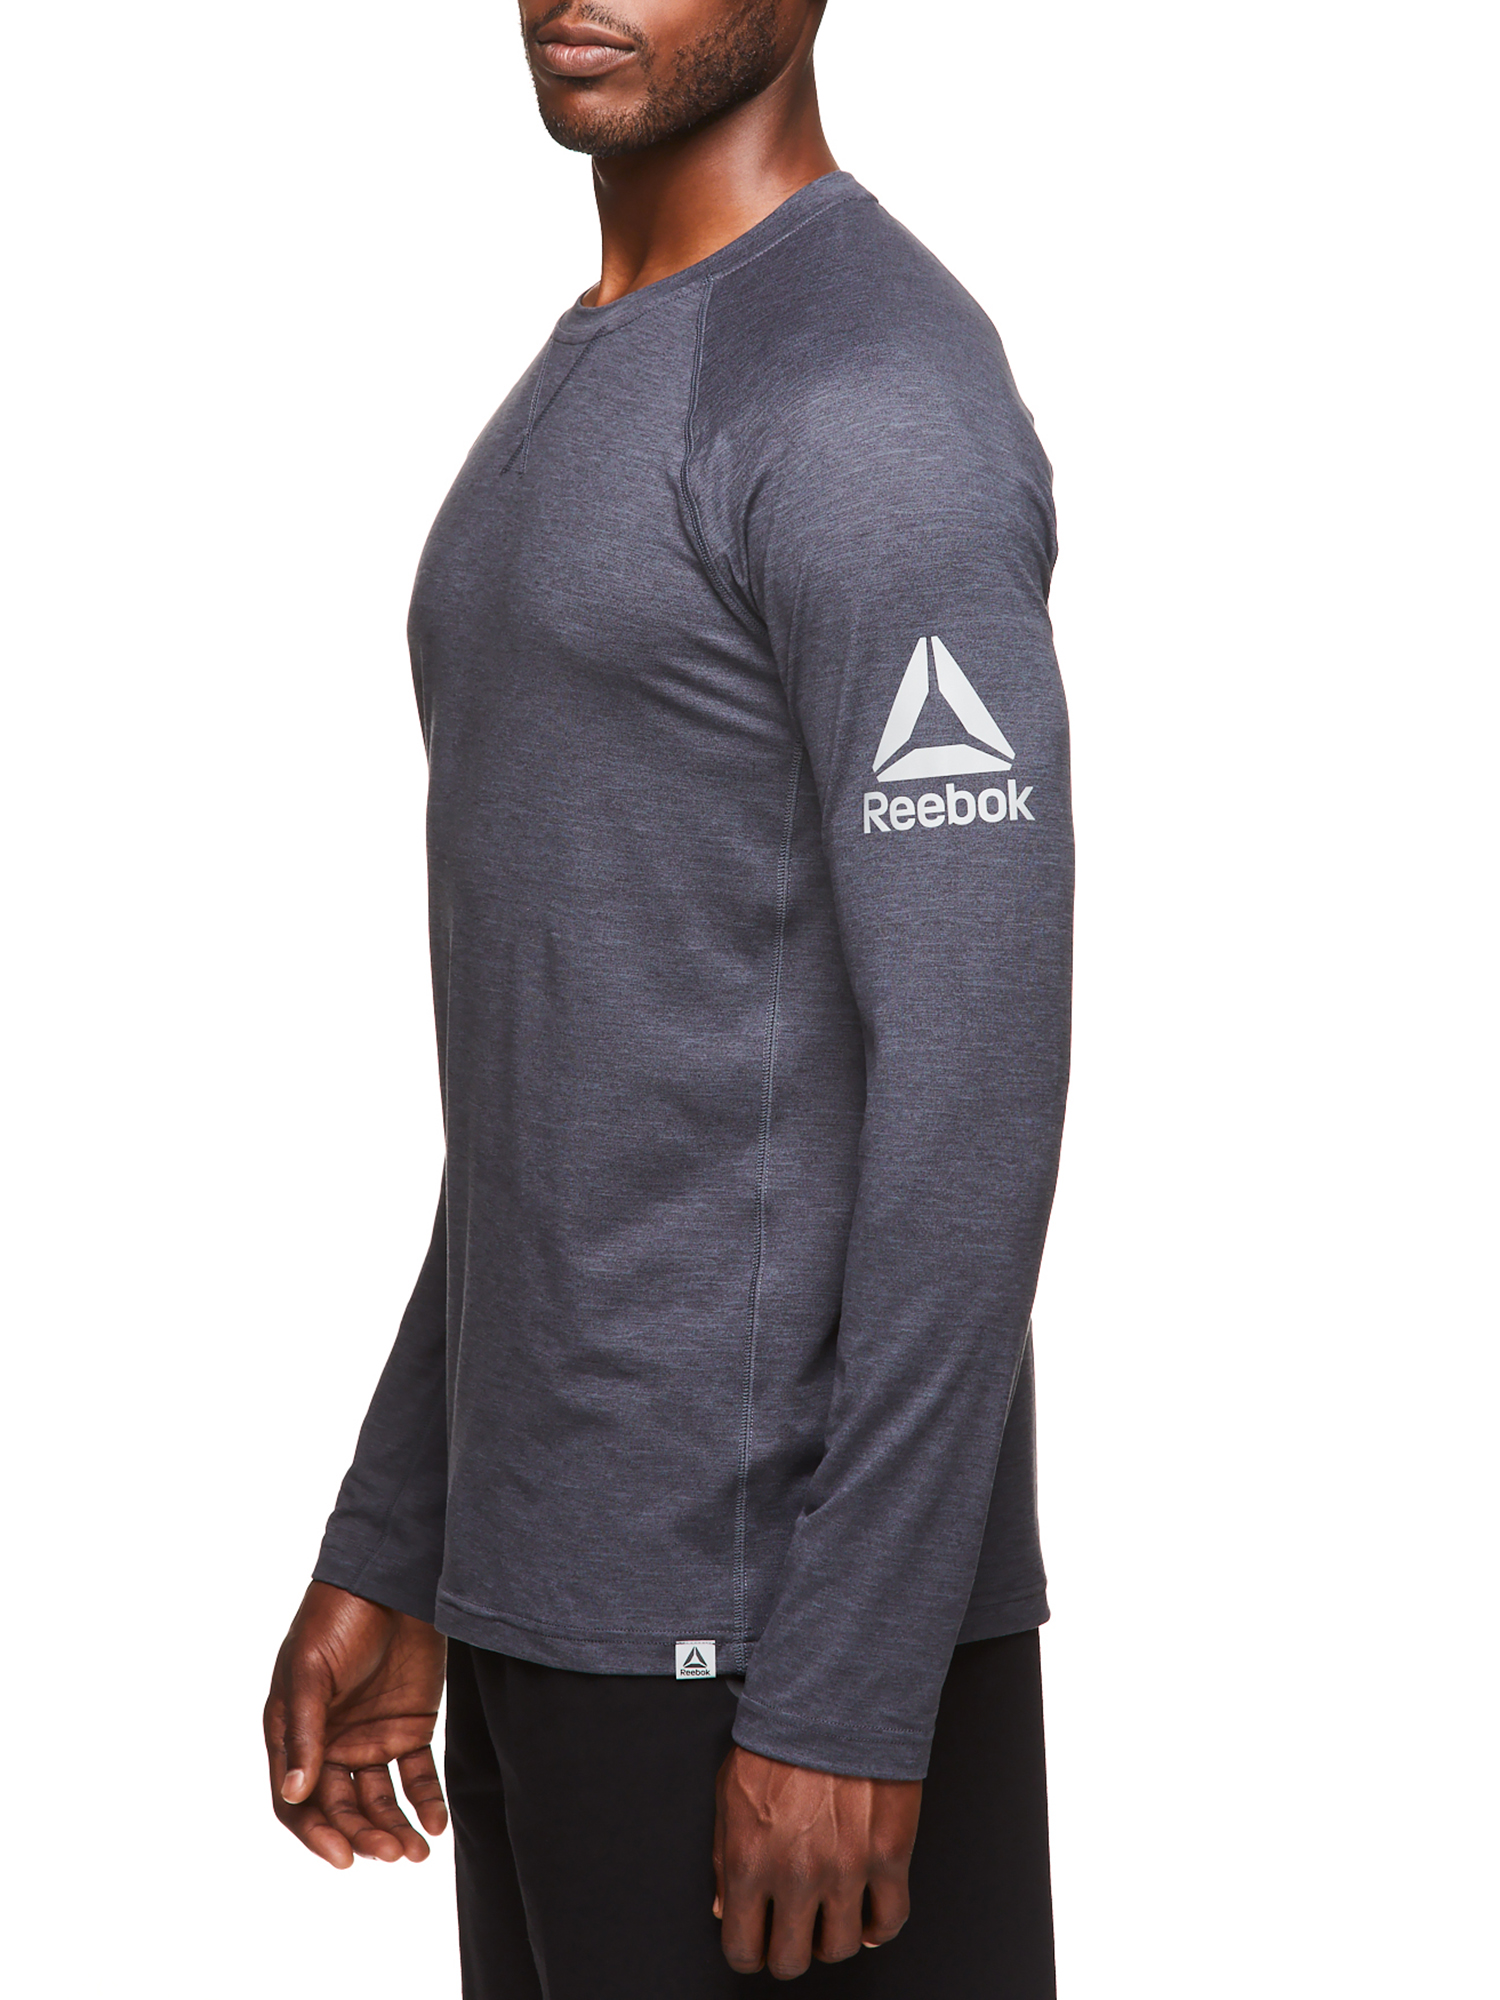 Reebok Men's and Big Men's Active Long Sleeve Warm-Up Training Crew, up to Size 3XL - image 4 of 4